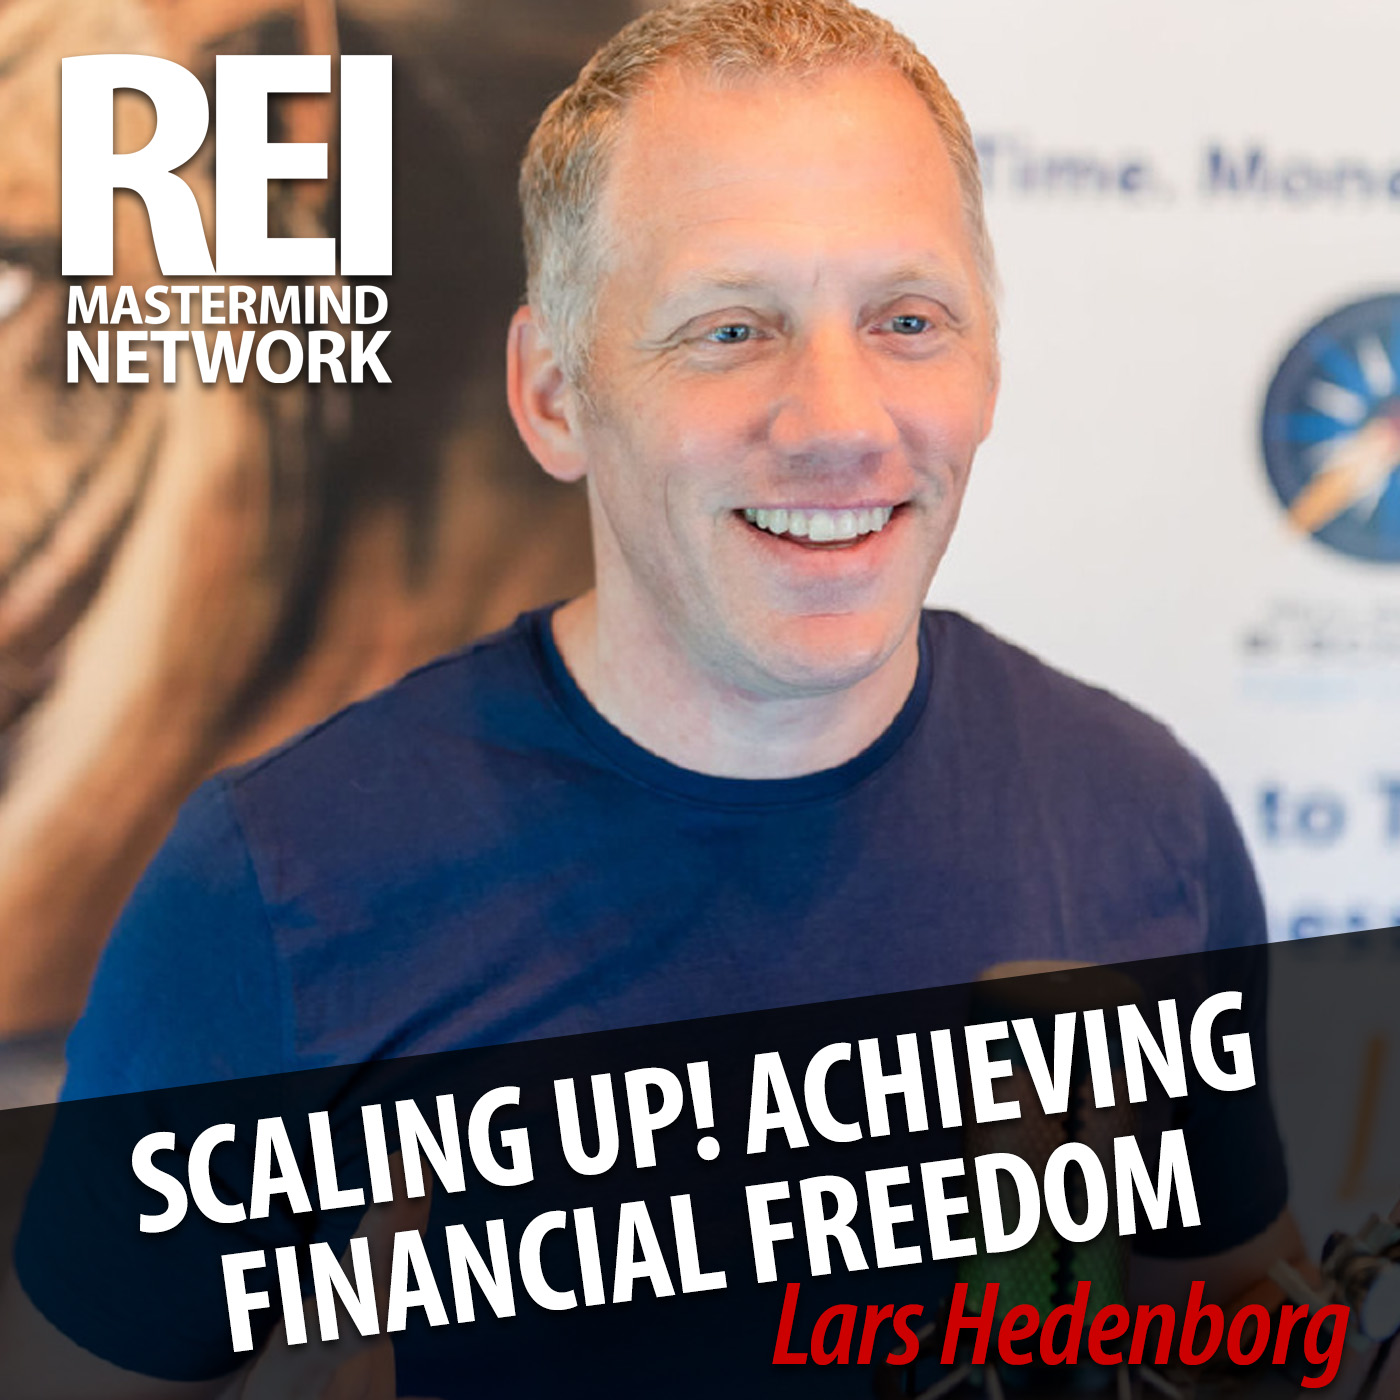 Scaling Up! Achieving Financial Freedom Through Real Estate Investing with Lars Hedenborg